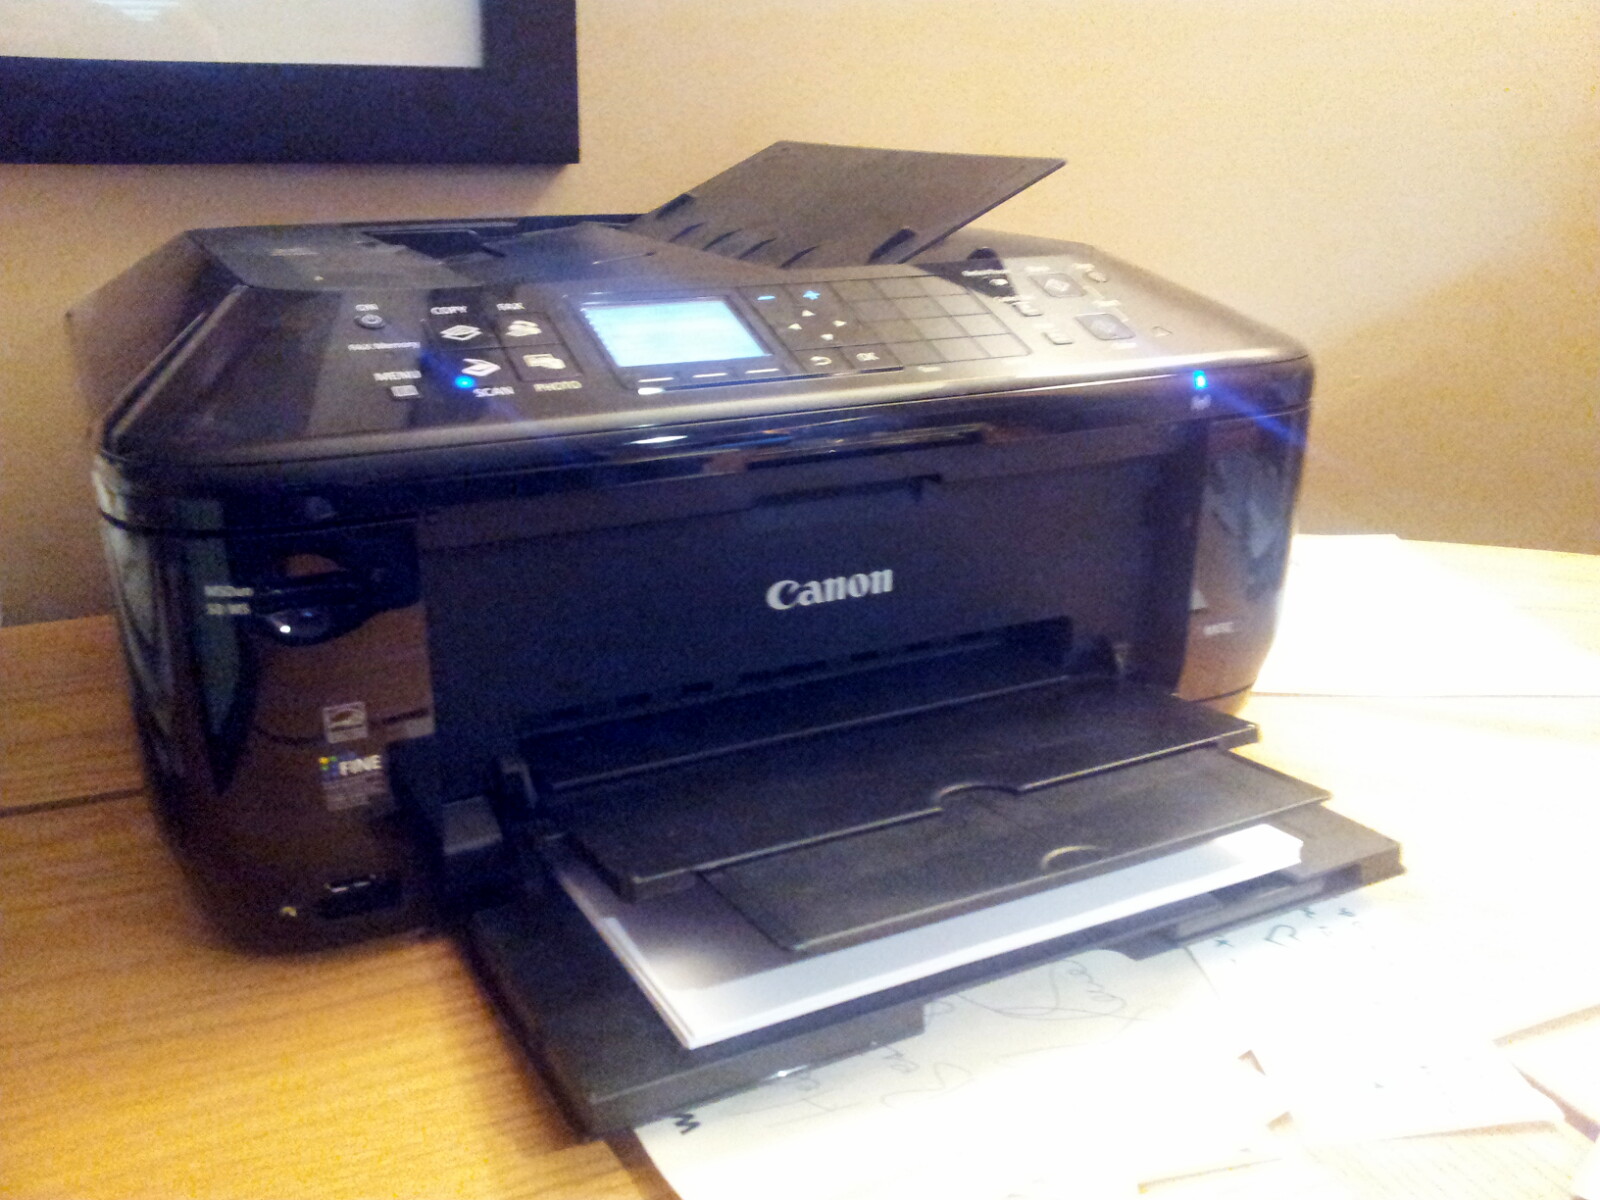 Canon PIXMA MX532 Wireless Color Photo Printer with Scanner, Copier and Fax